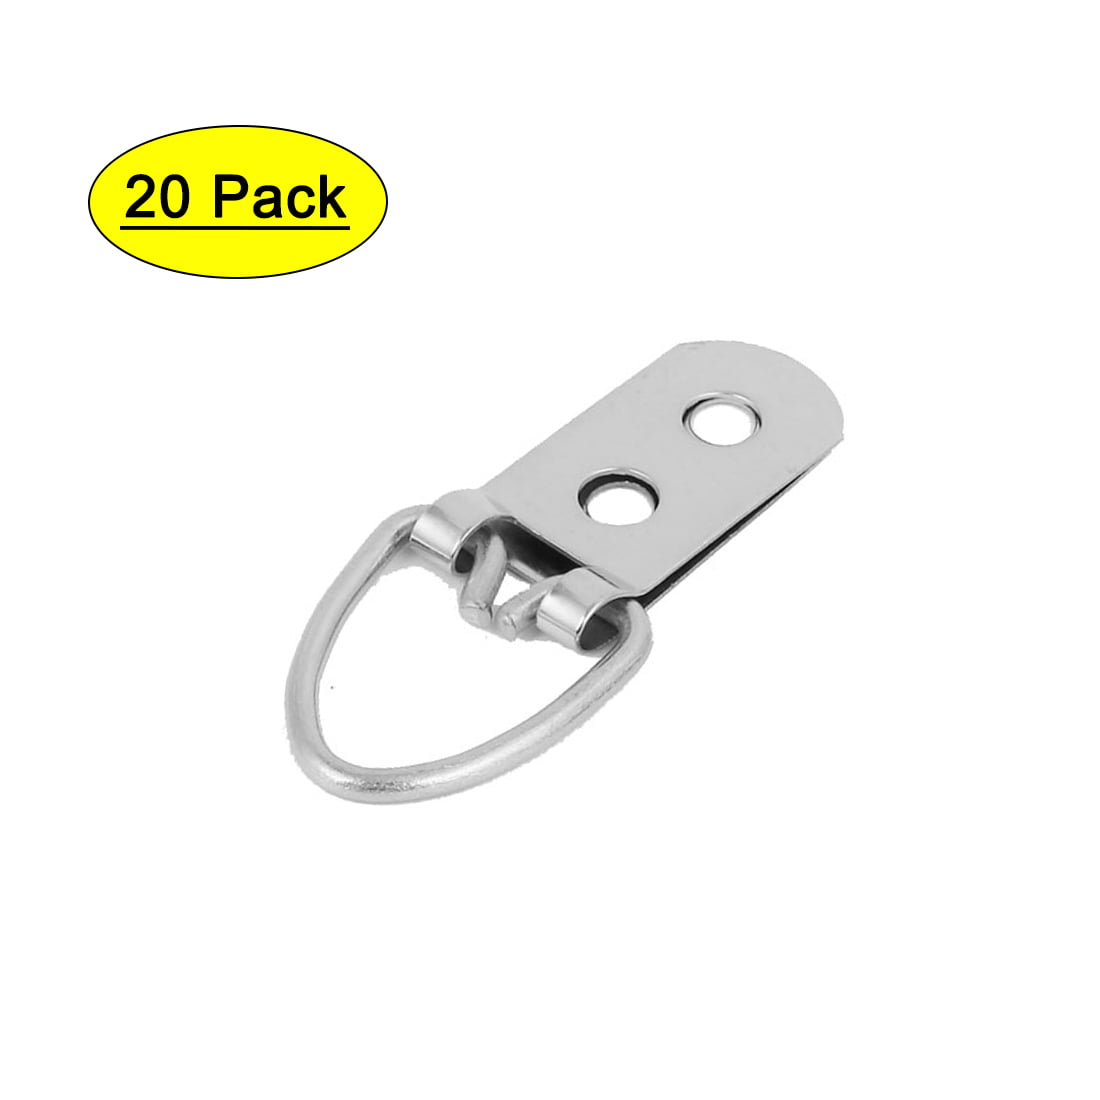 Ten 23mm Metal Keyhole Hangers Fasteners for Photo Picture Frame 